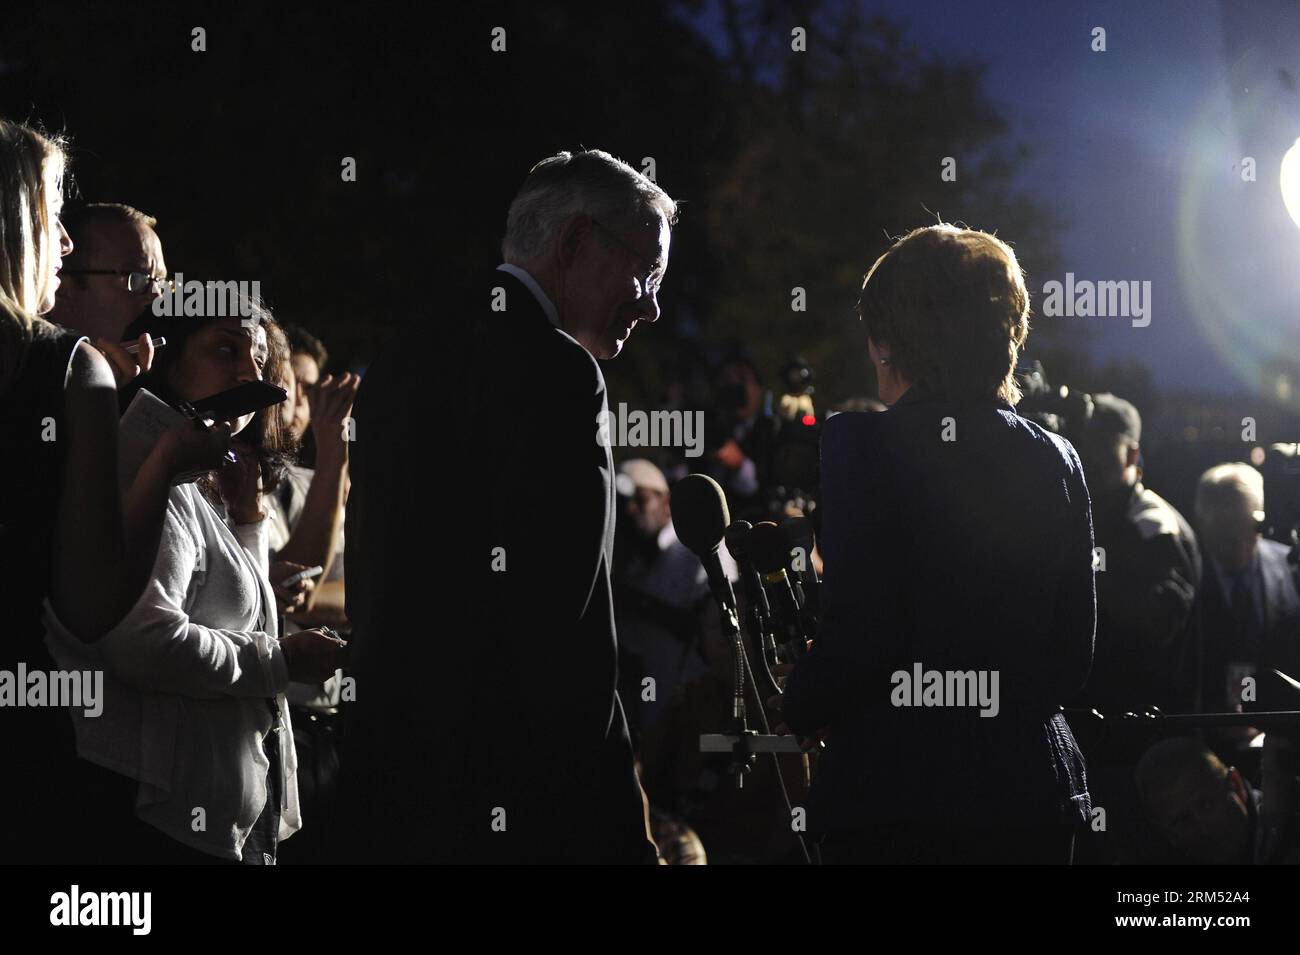 Bildnummer: 60554609  Datum: 02.10.2013  Copyright: imago/Xinhua (131003) -- WASHINGTON, Oct. 3, 2013 (Xinhua) -- US House Democratic leader Nancy Pelosi (R center) and Senate Majority Leader Harry Reid (L center) meet the press after talks with President BarackxObama at the White House in Washington Oct. 2, 2013. BarackxObama met the four top leaders of the Congress at the White House on Wednesday to urge lawmakers to reopen the government and raise the US debt ceiling. (Xinhua/Zhang Jun) US-WASHINGTON-PRESIDENT-CONGRESS LEADERS-MEETING PUBLICATIONxNOTxINxCHN People Politik xns x1x 2013 quer Stock Photo